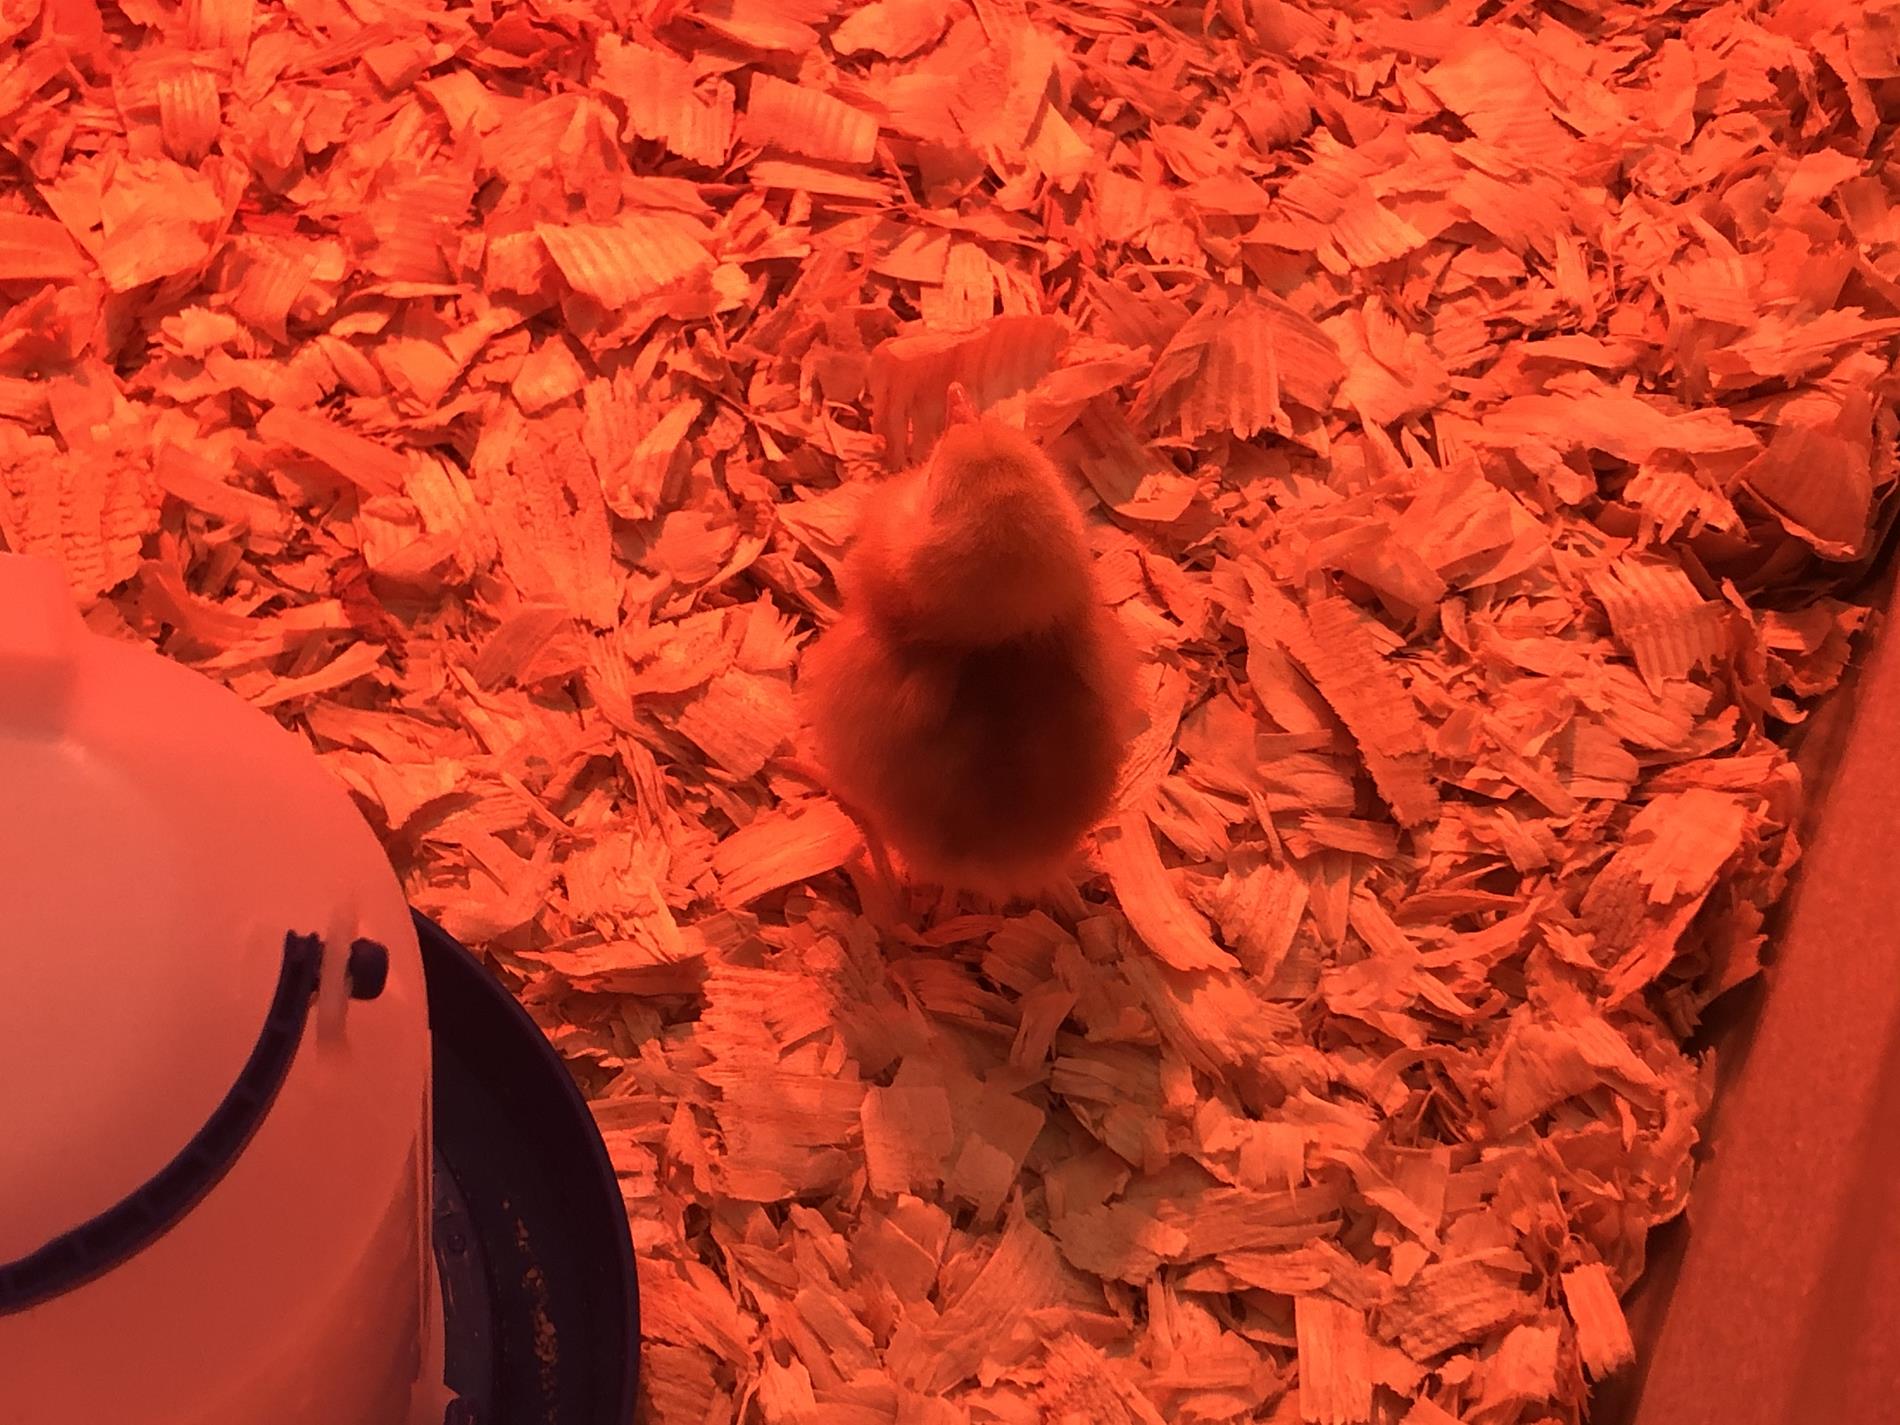 Taking Care of Baby Chicks In a Red Lit Up Area 